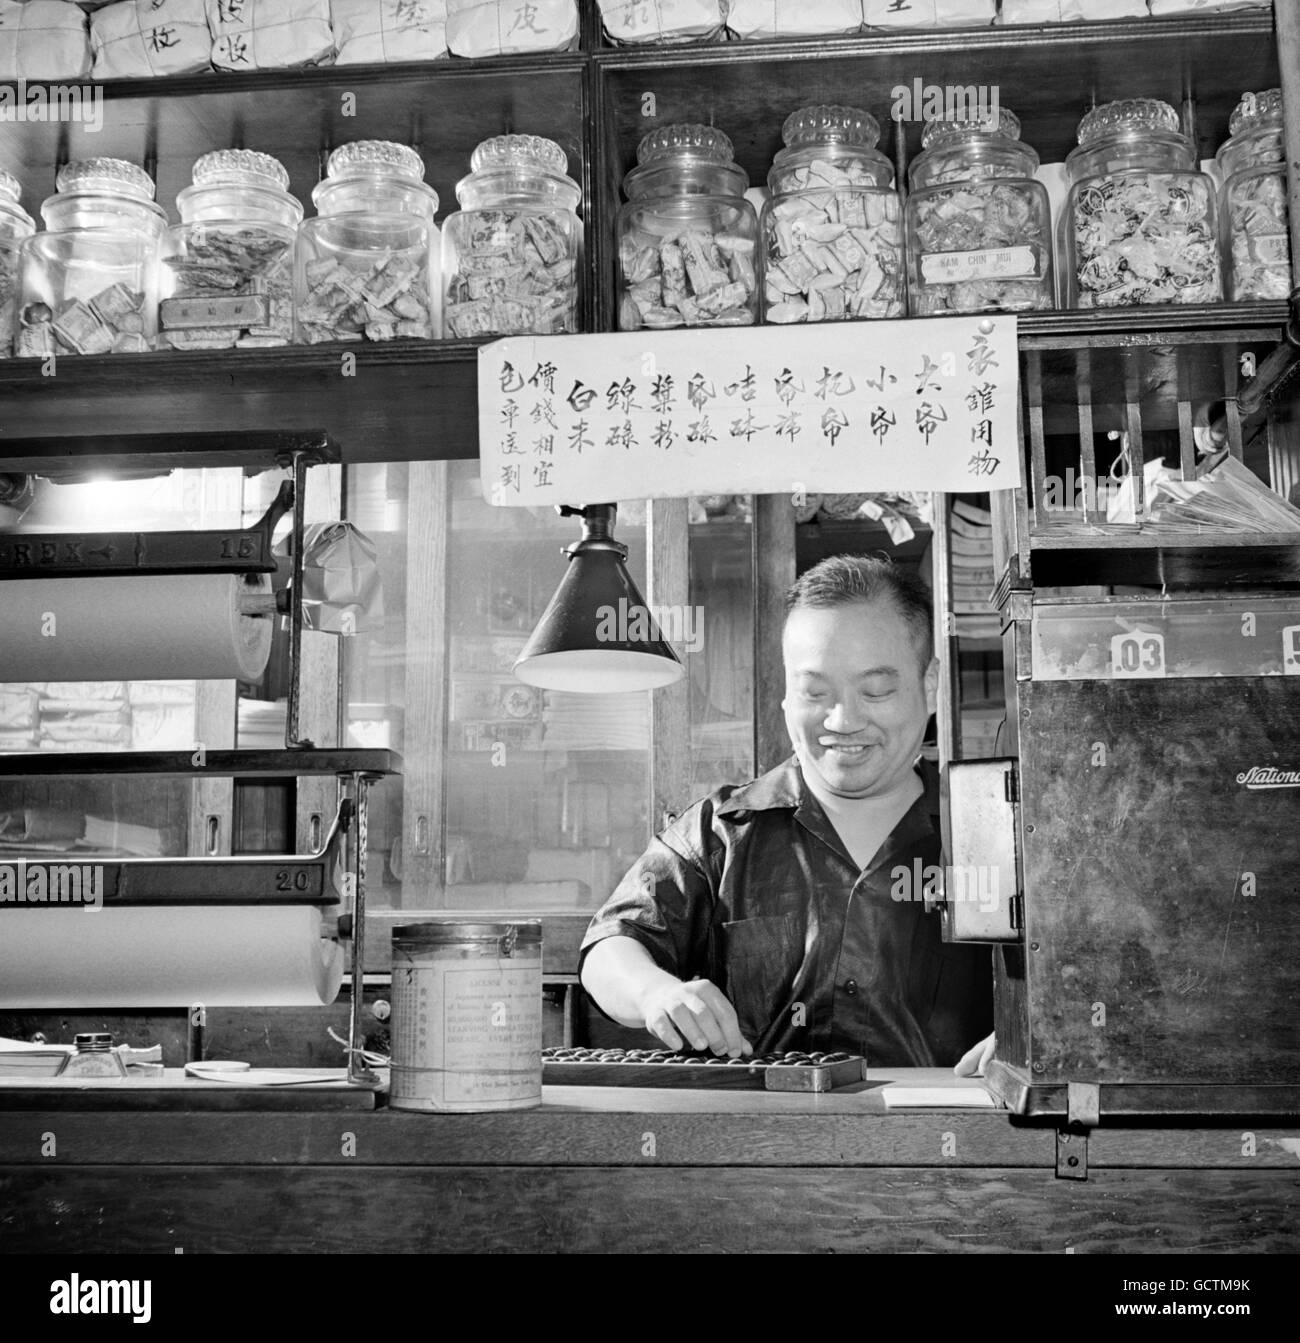 Chinese shopkeeper using an abacus in a grocery store in Chinatown, New York City, NY in 1942.  Photo by Marjory Collins, US Farm Security Administration. Stock Photo